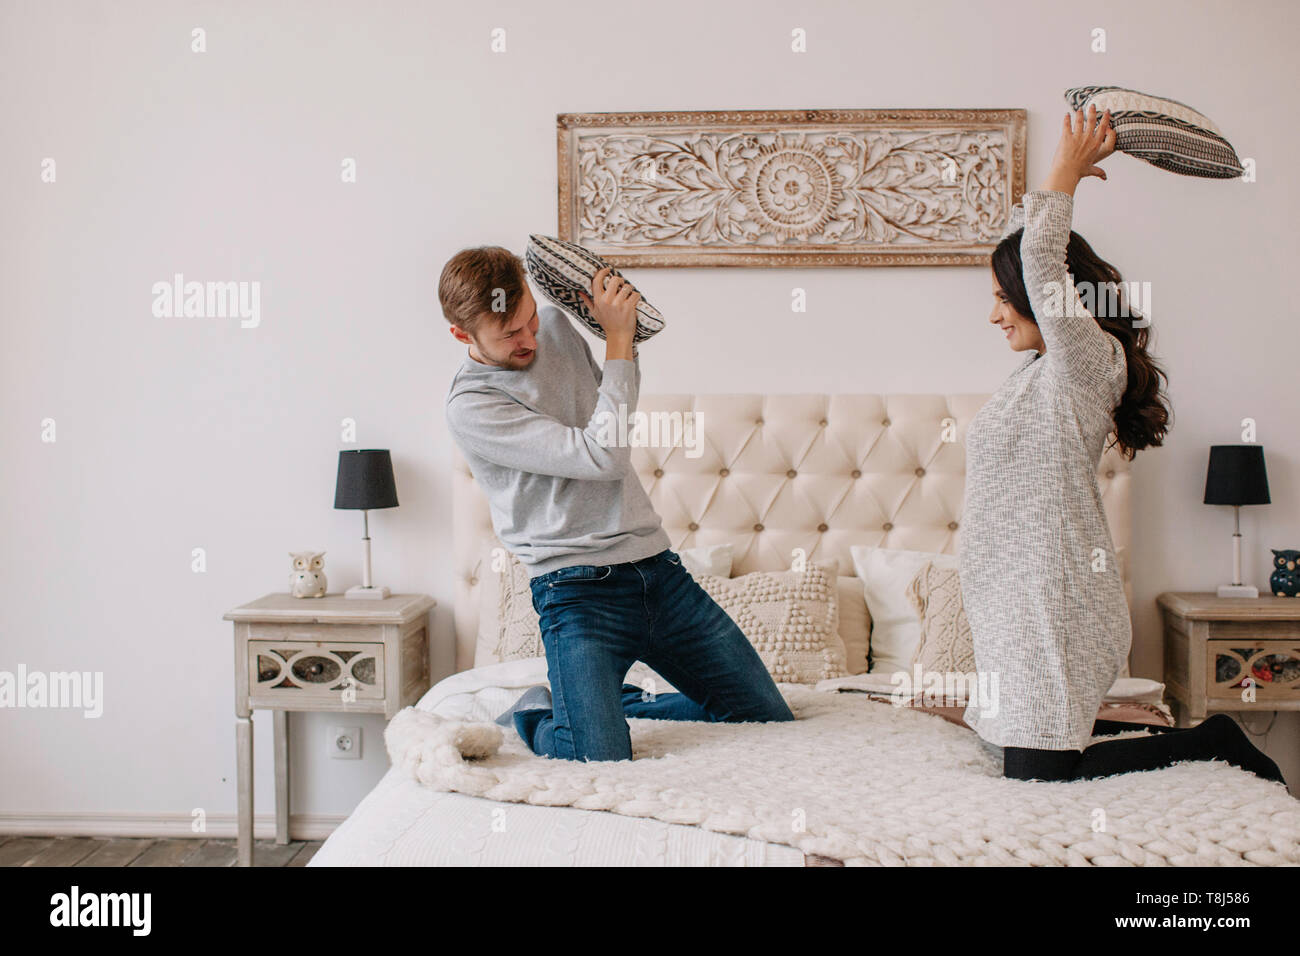 Couple having a pillow fight in the bedroom Stock Photo